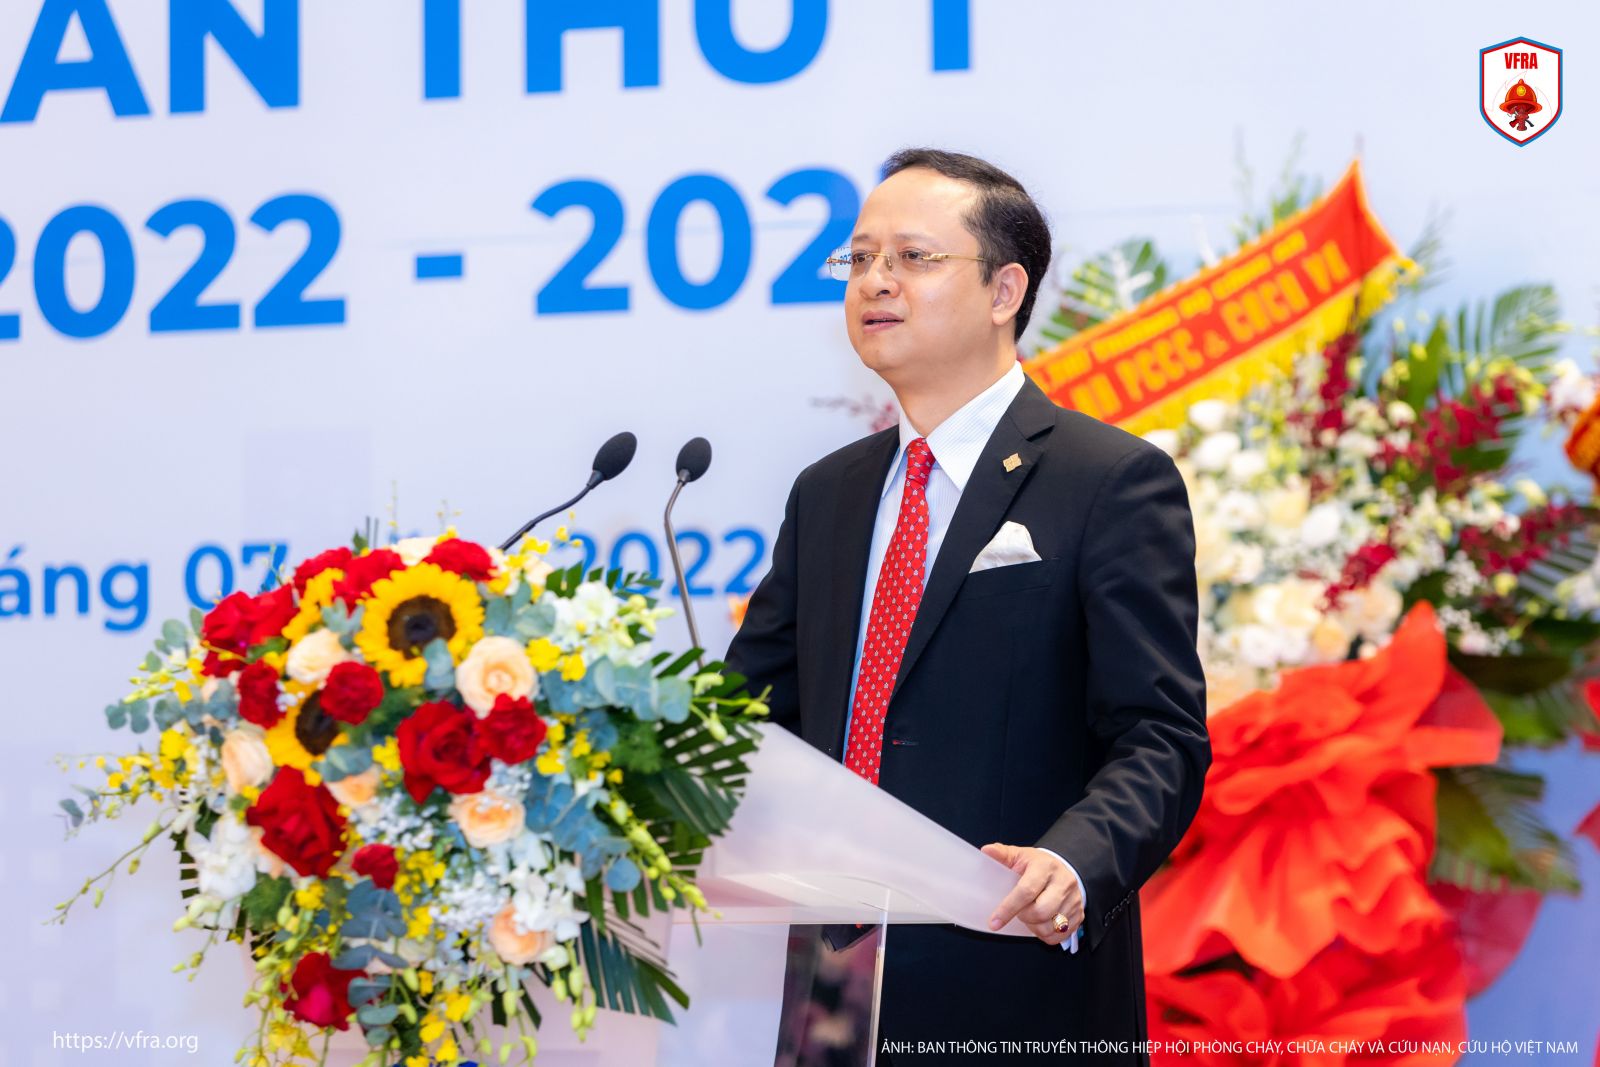 Chairman of NDTC. Companies is elected as Chairman of Vietnam Fire & Rescue Association for the term 2022-2027